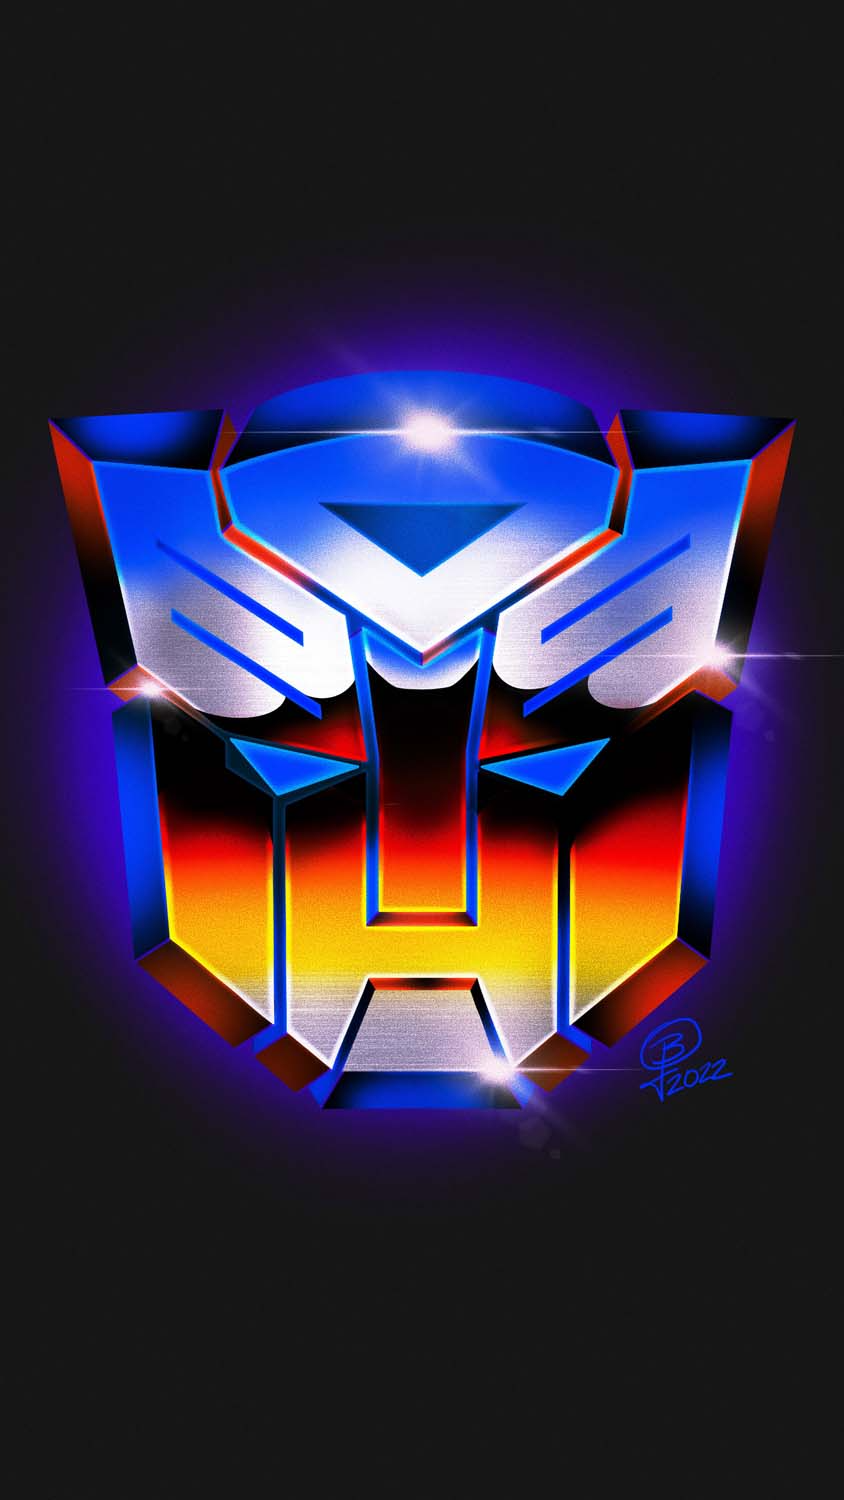 Transformers Autobots Logo iPhone Wallpaper  iPhone Wallpapers